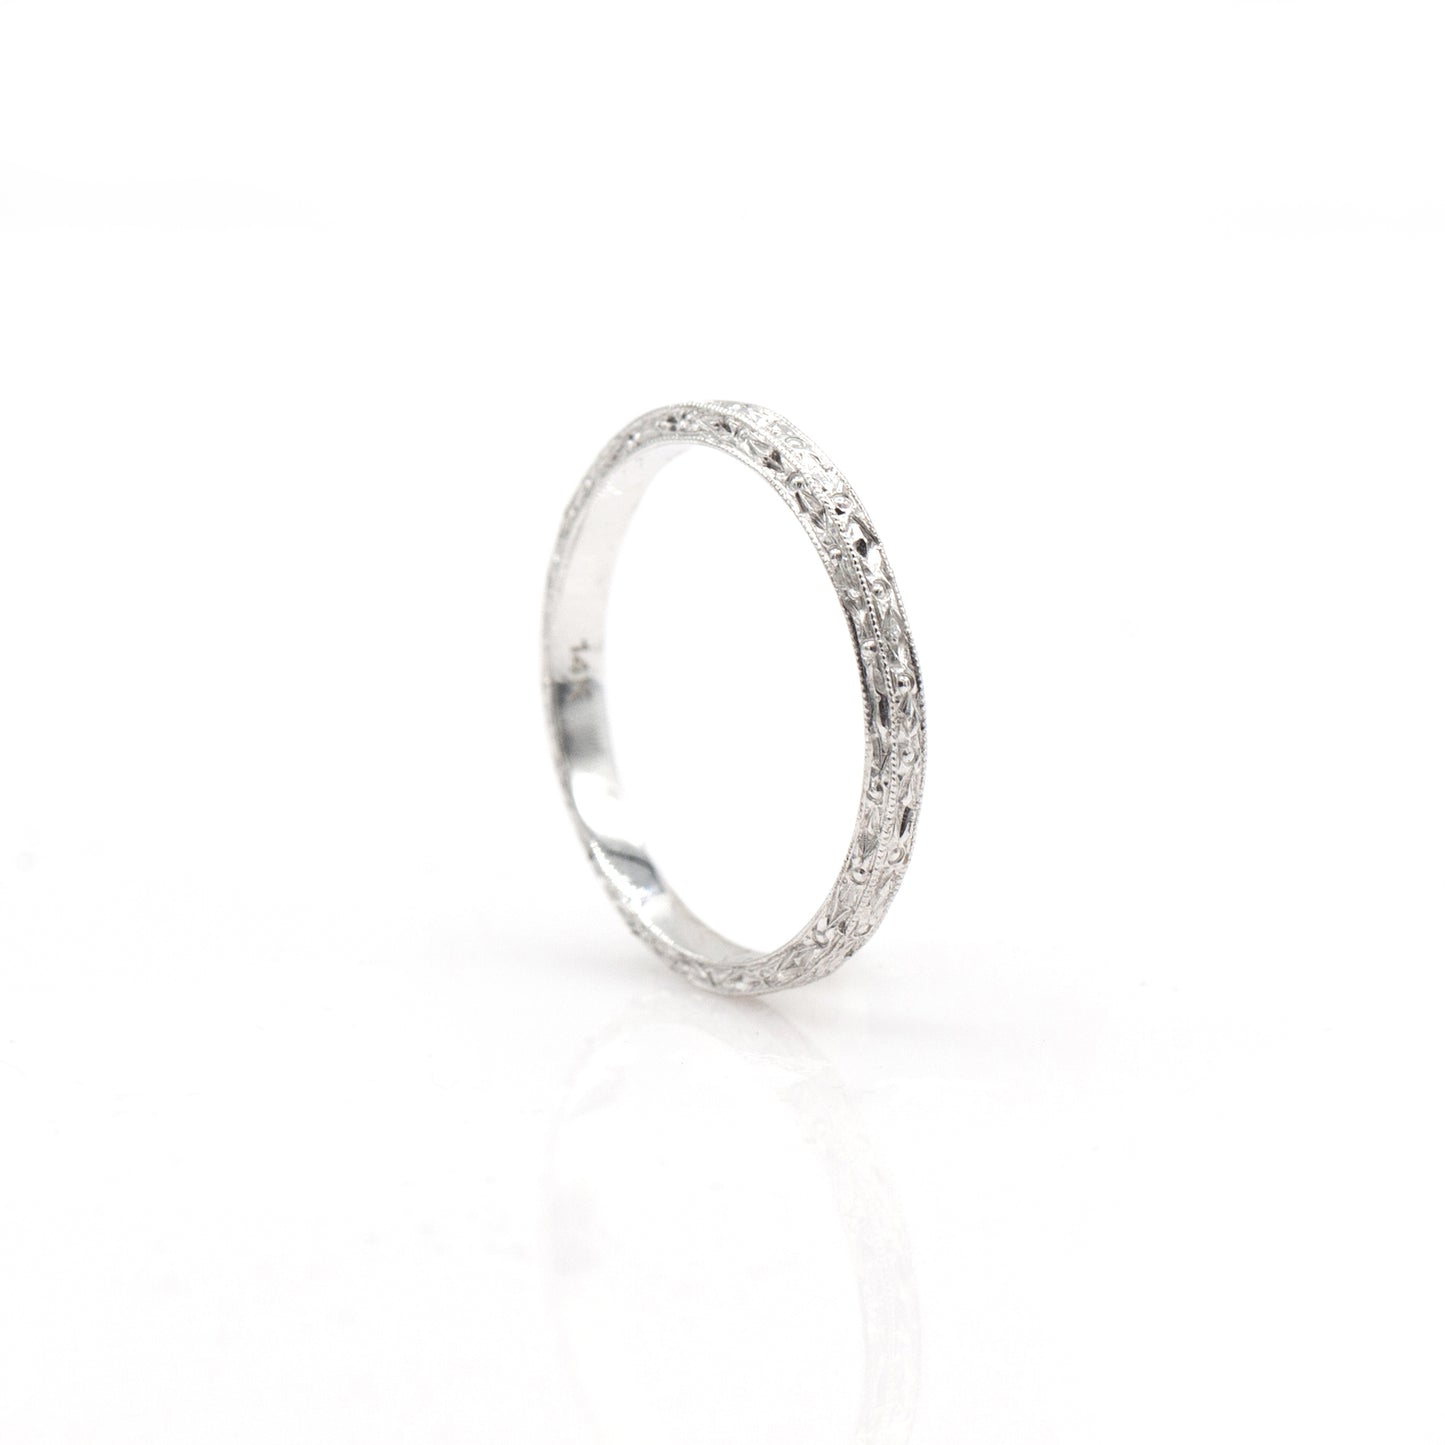 14k White Gold Engraved Scroll Band